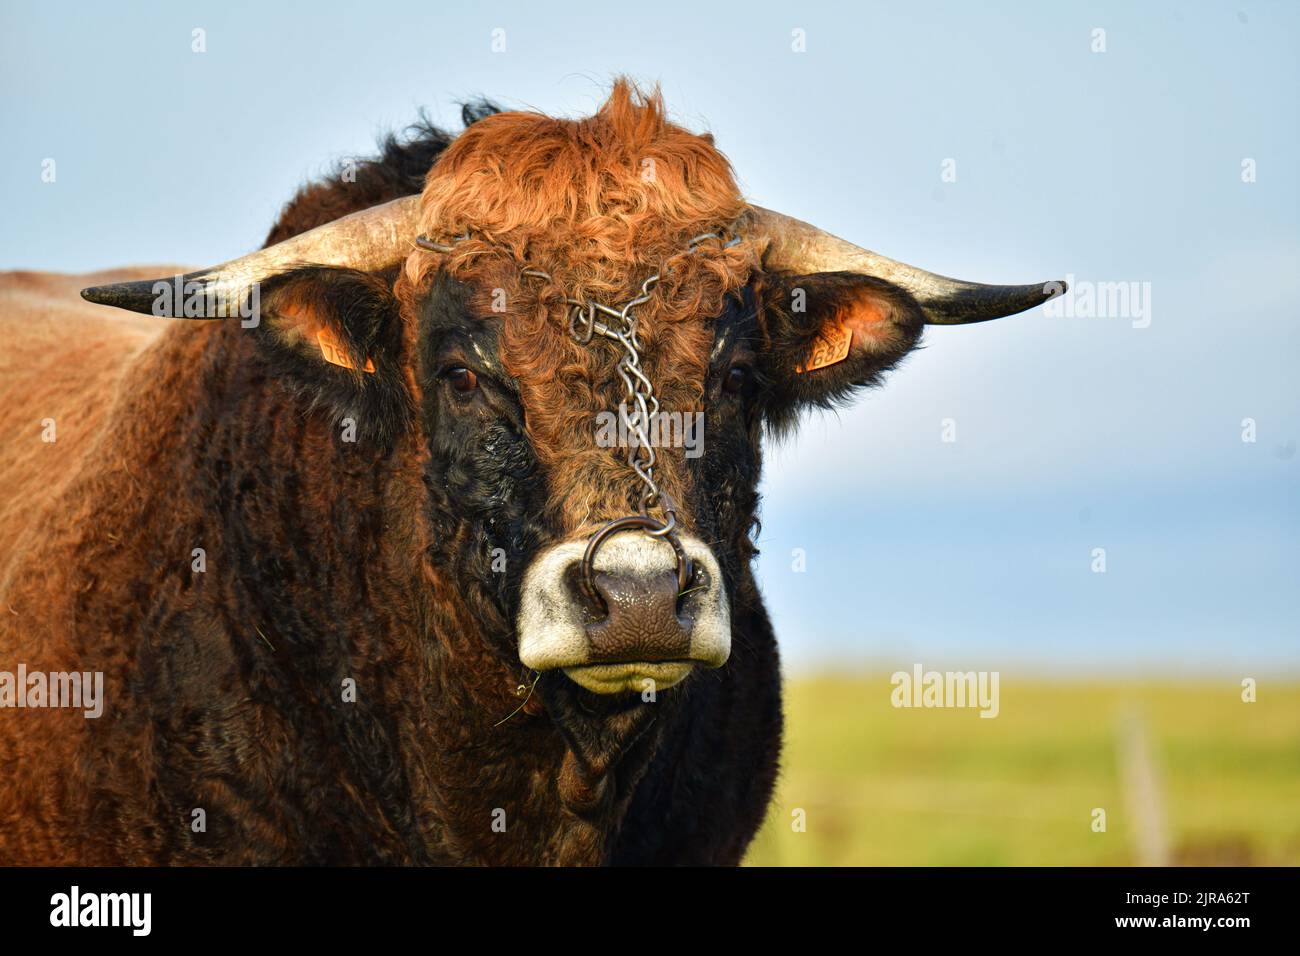 Chanaleilles (south of France): Aubrac bull with a ring in a field. Portrait, three-quarter length Stock Photo